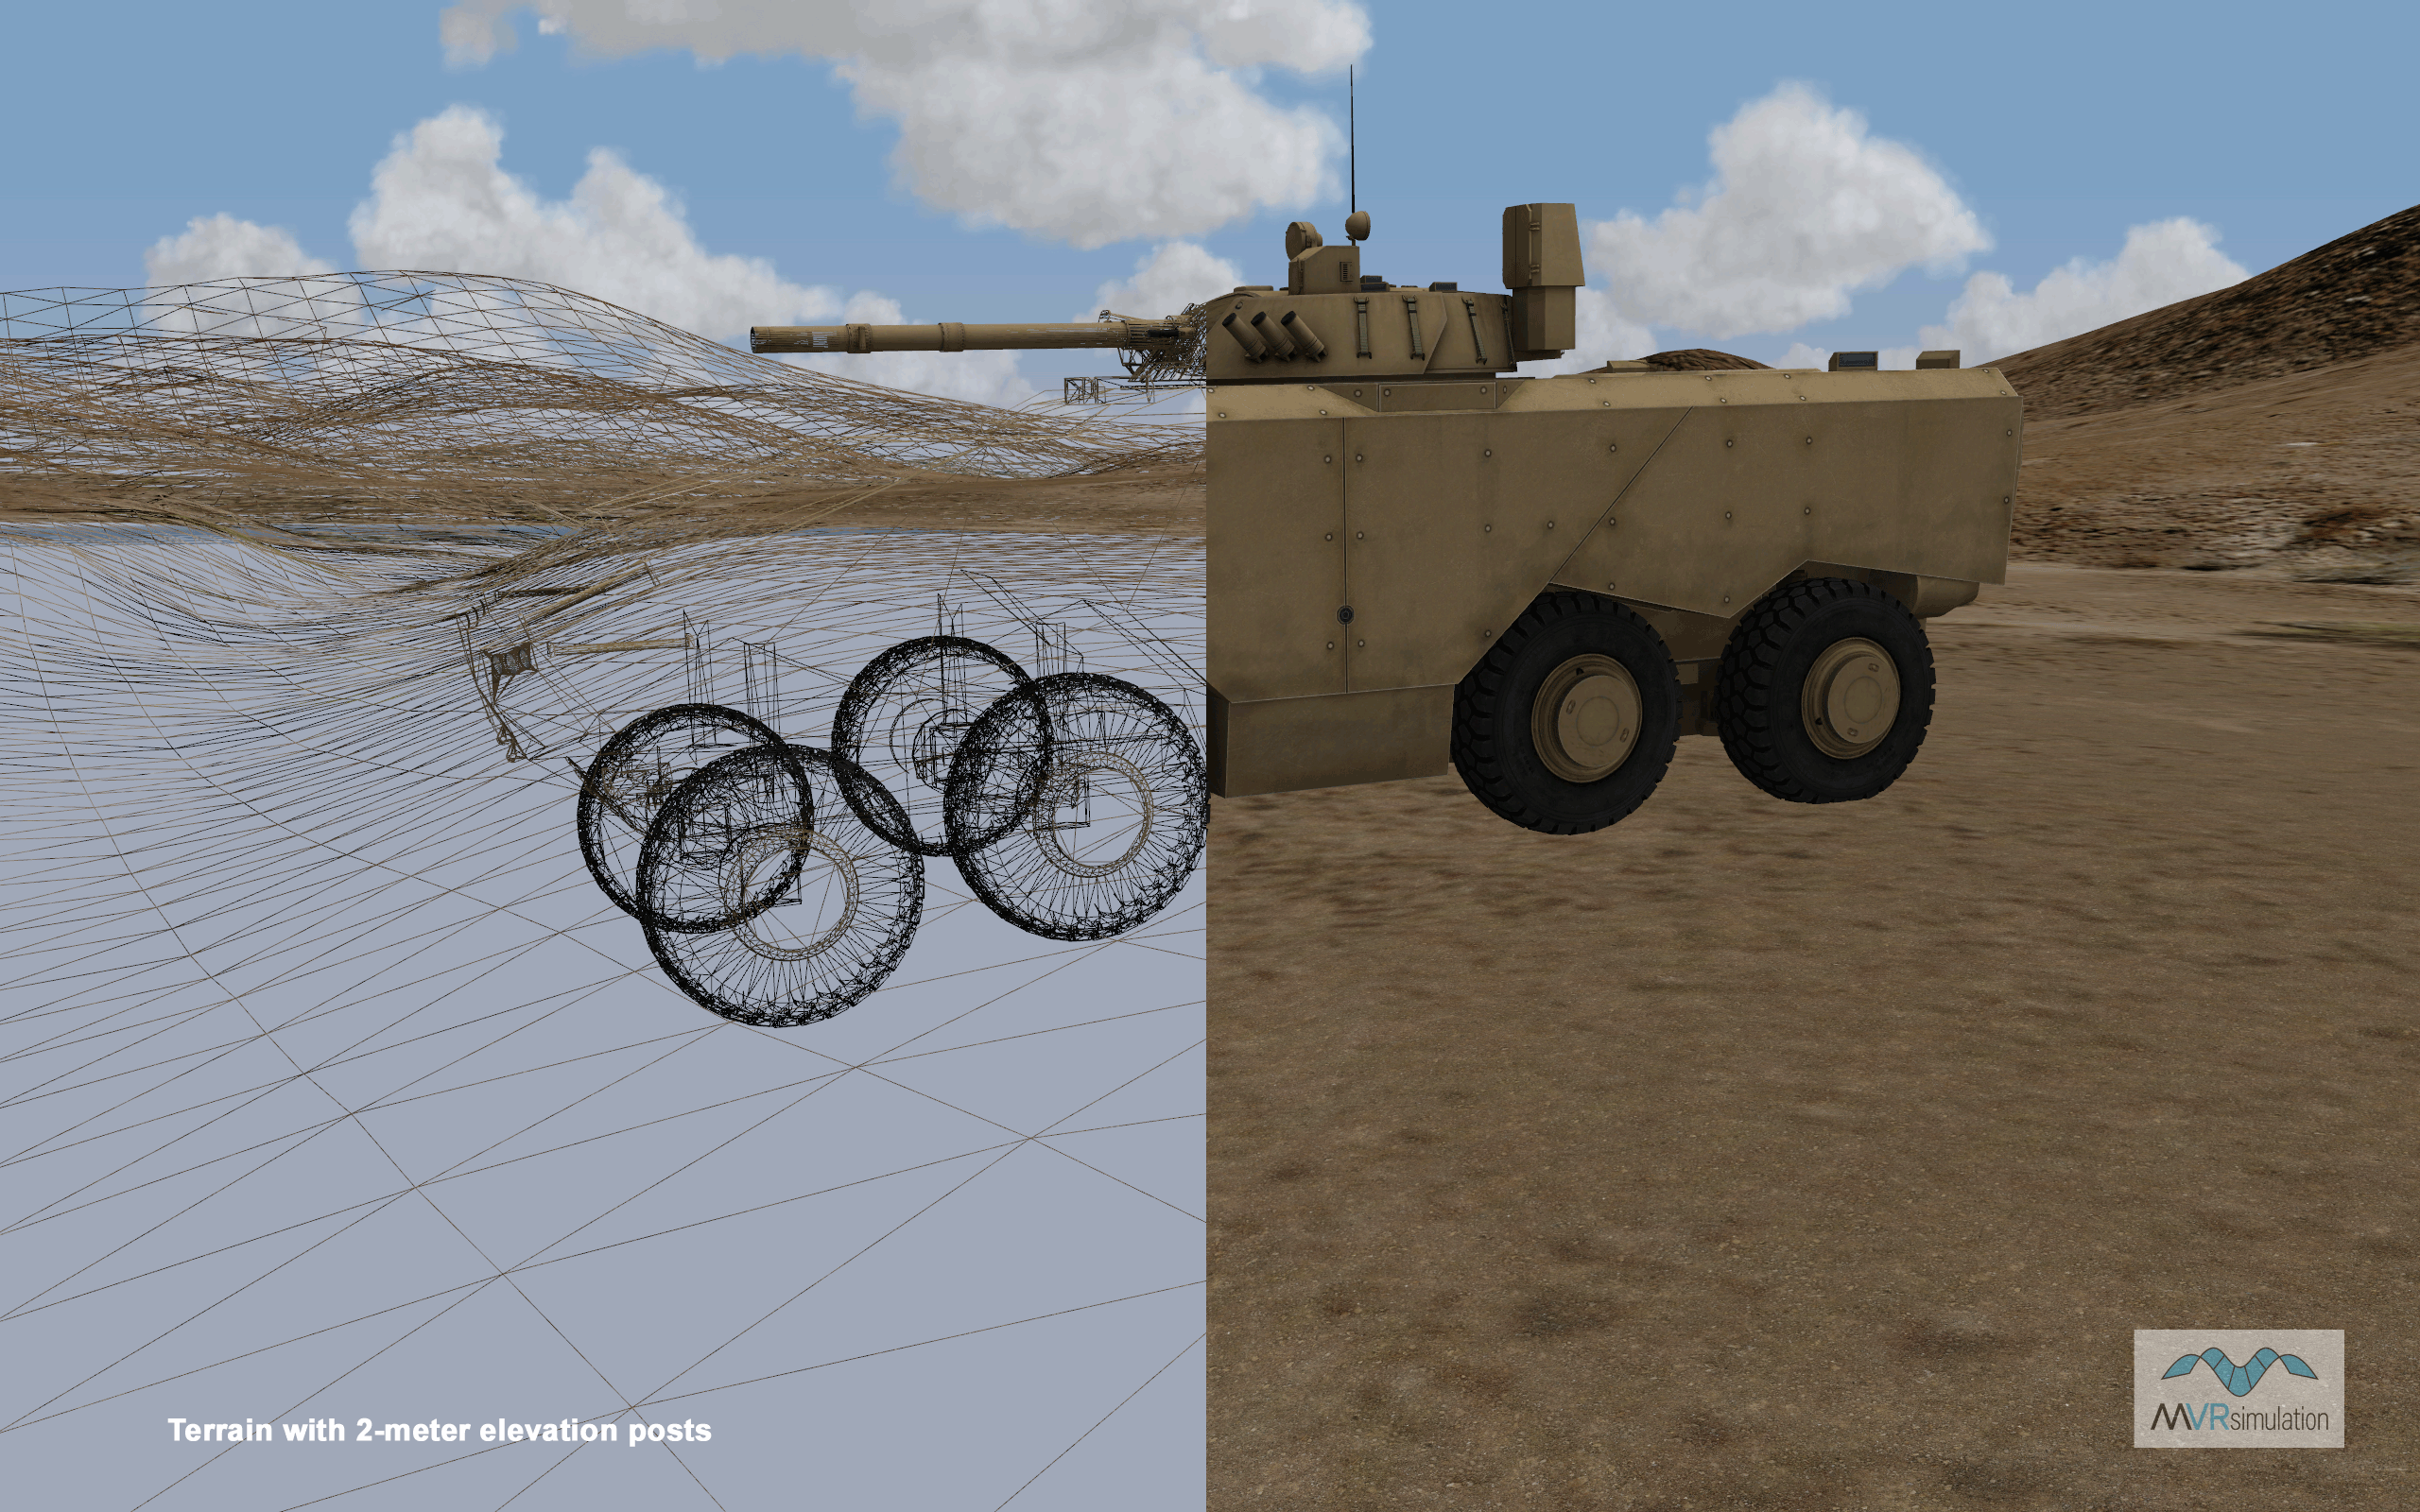 Cycling through the effect of the elevation data on suspension with MVRsimulation's model of Enigma 8x8 vehicle.